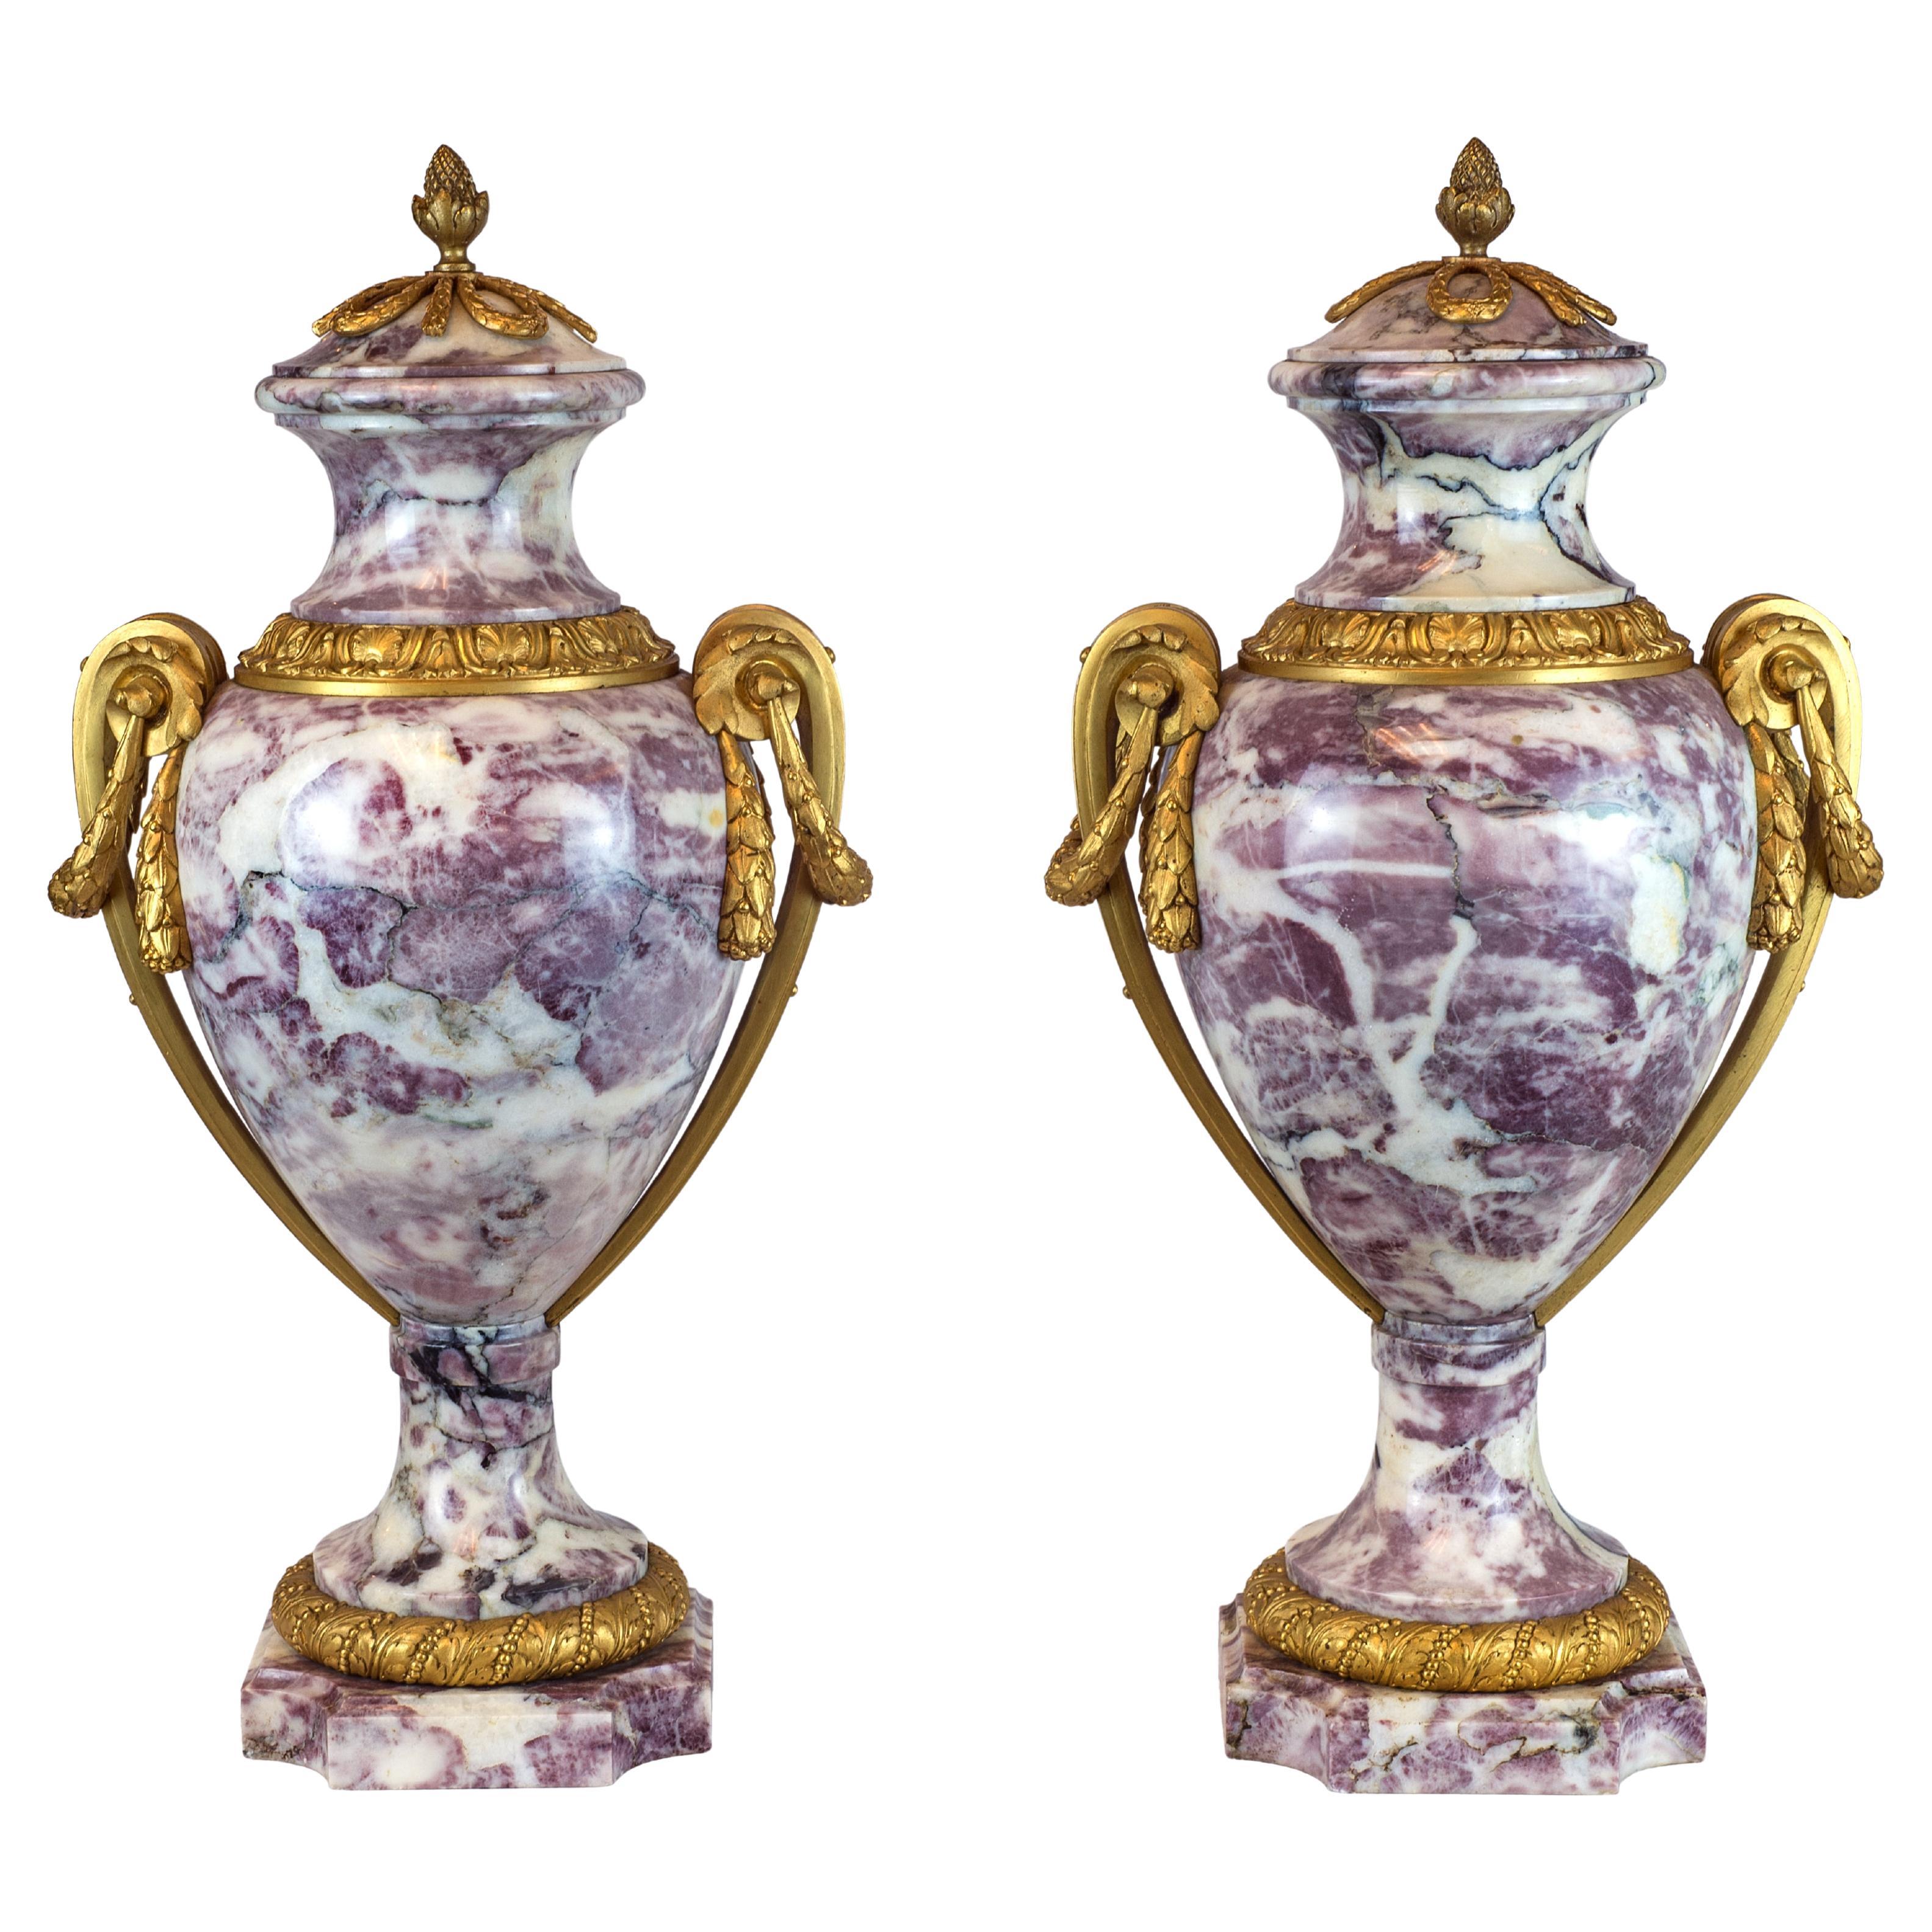 Pair of Elegant Ormolu-Mounted Brèche Violette Marble Covered Urns For Sale